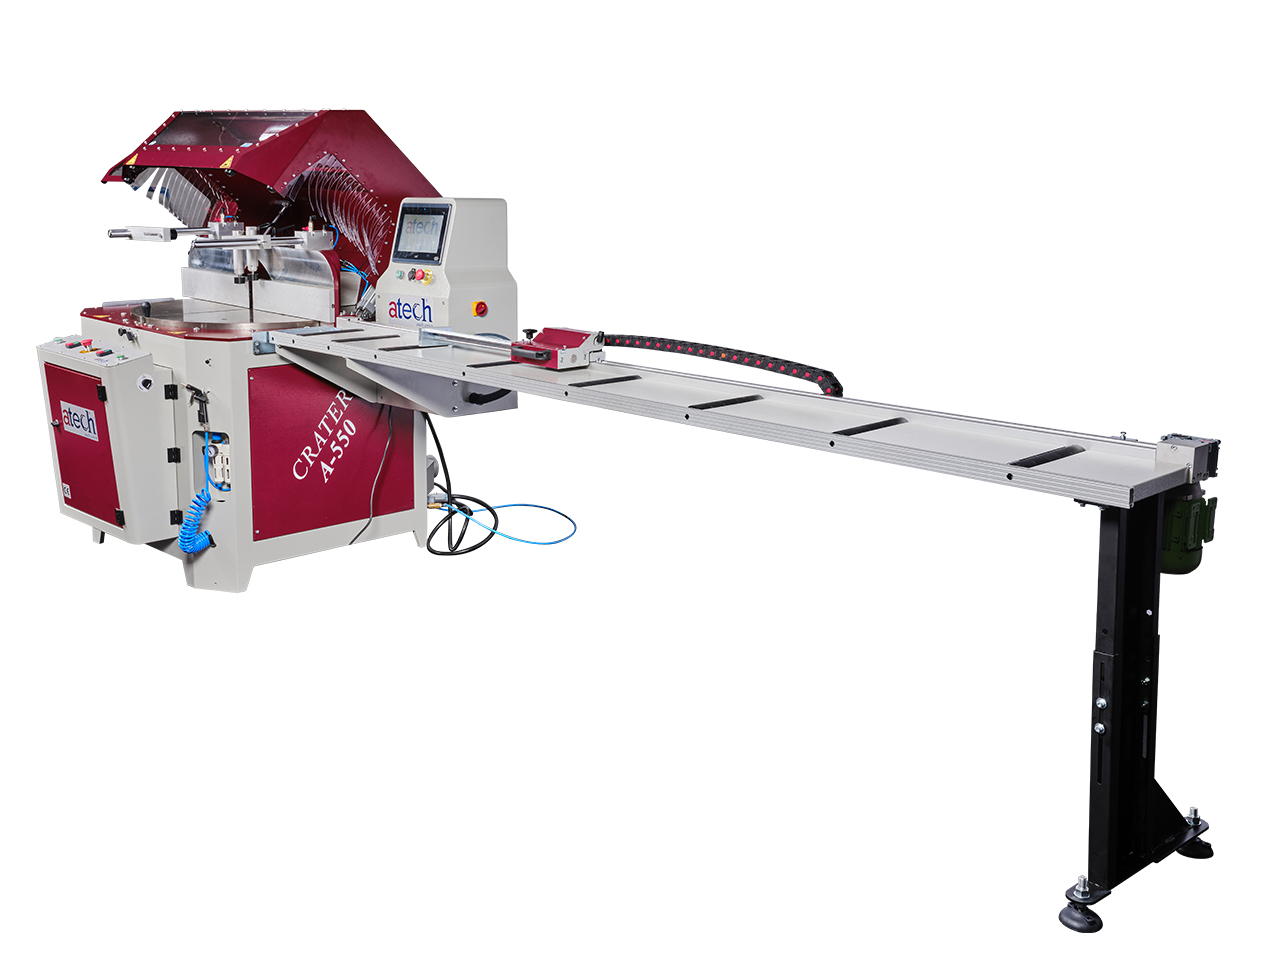 CRATER-06 A550 is a heavy duty 22 (550 mm) automatic aluminium profile upcut miter saw (10)